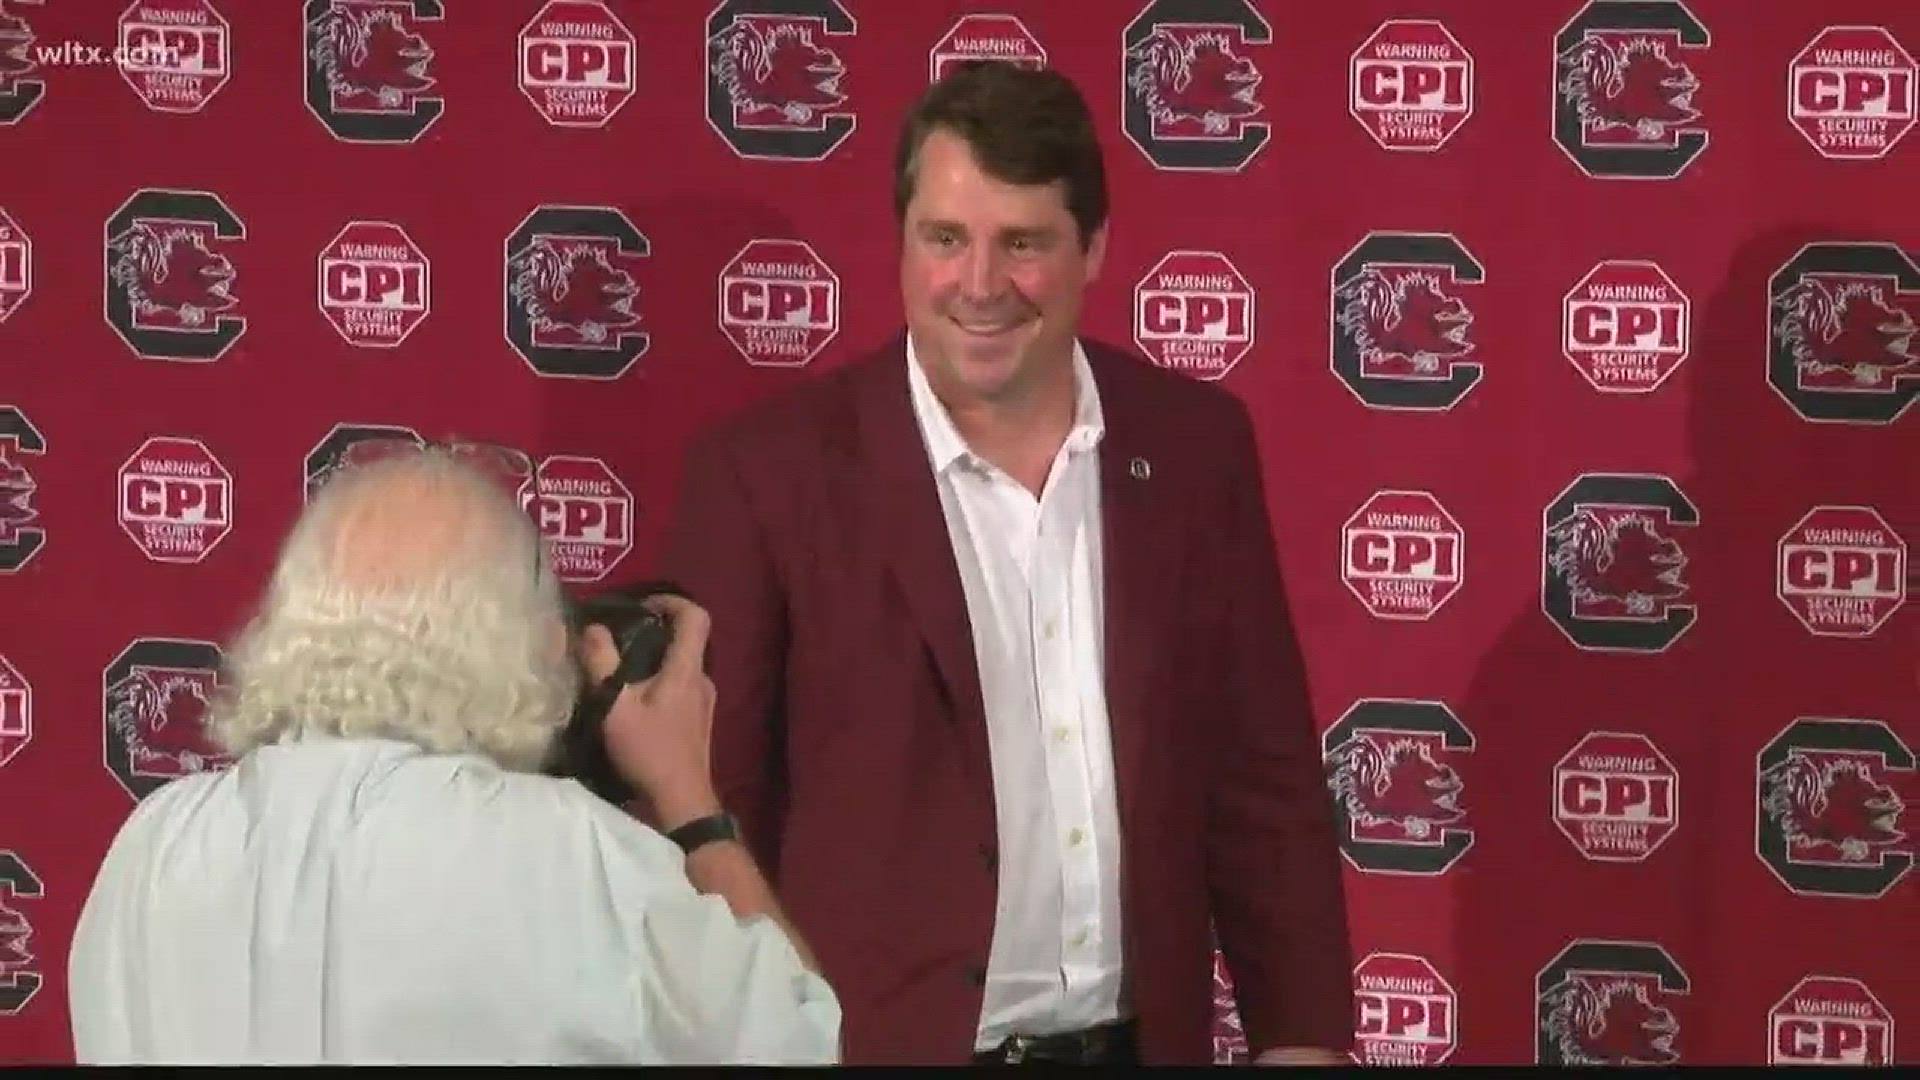 South Carolina Gamecocks Coach Will Muschamp and his assistants are getting pay raises after leading the team to its best season in four years.